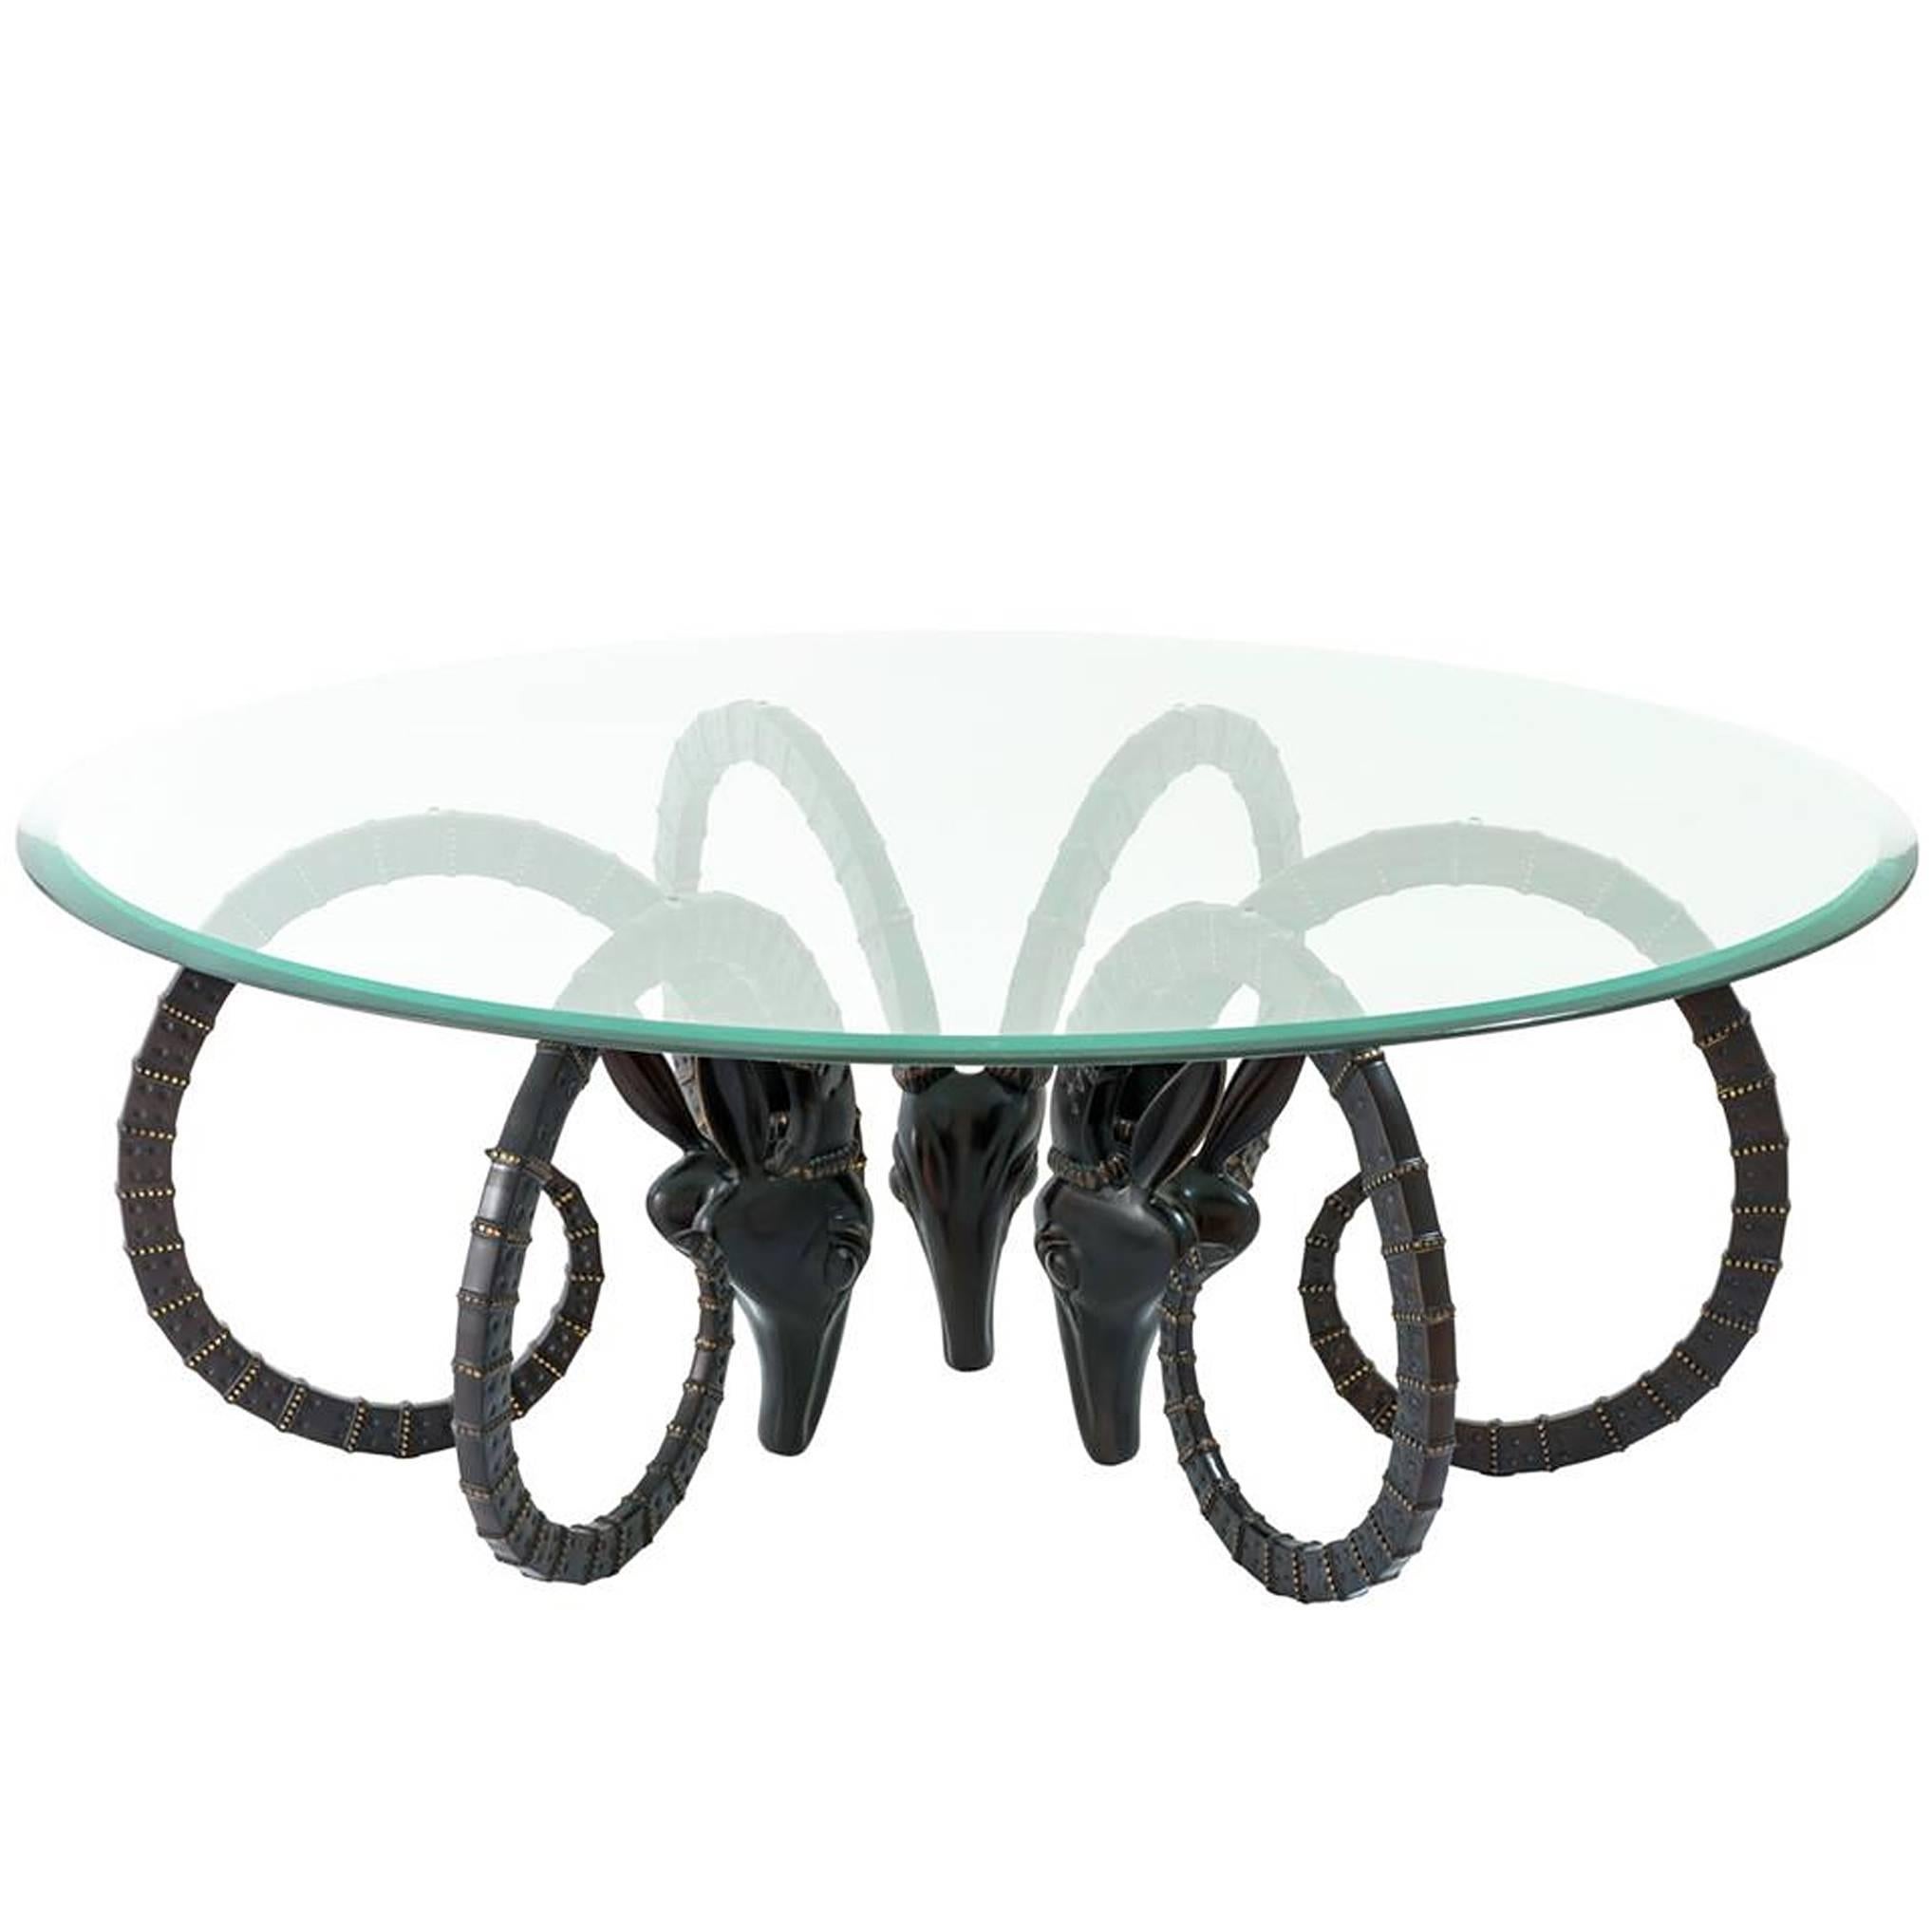 Calabra Coffee Table in Bronze Finish and Bevelled Clear Glass